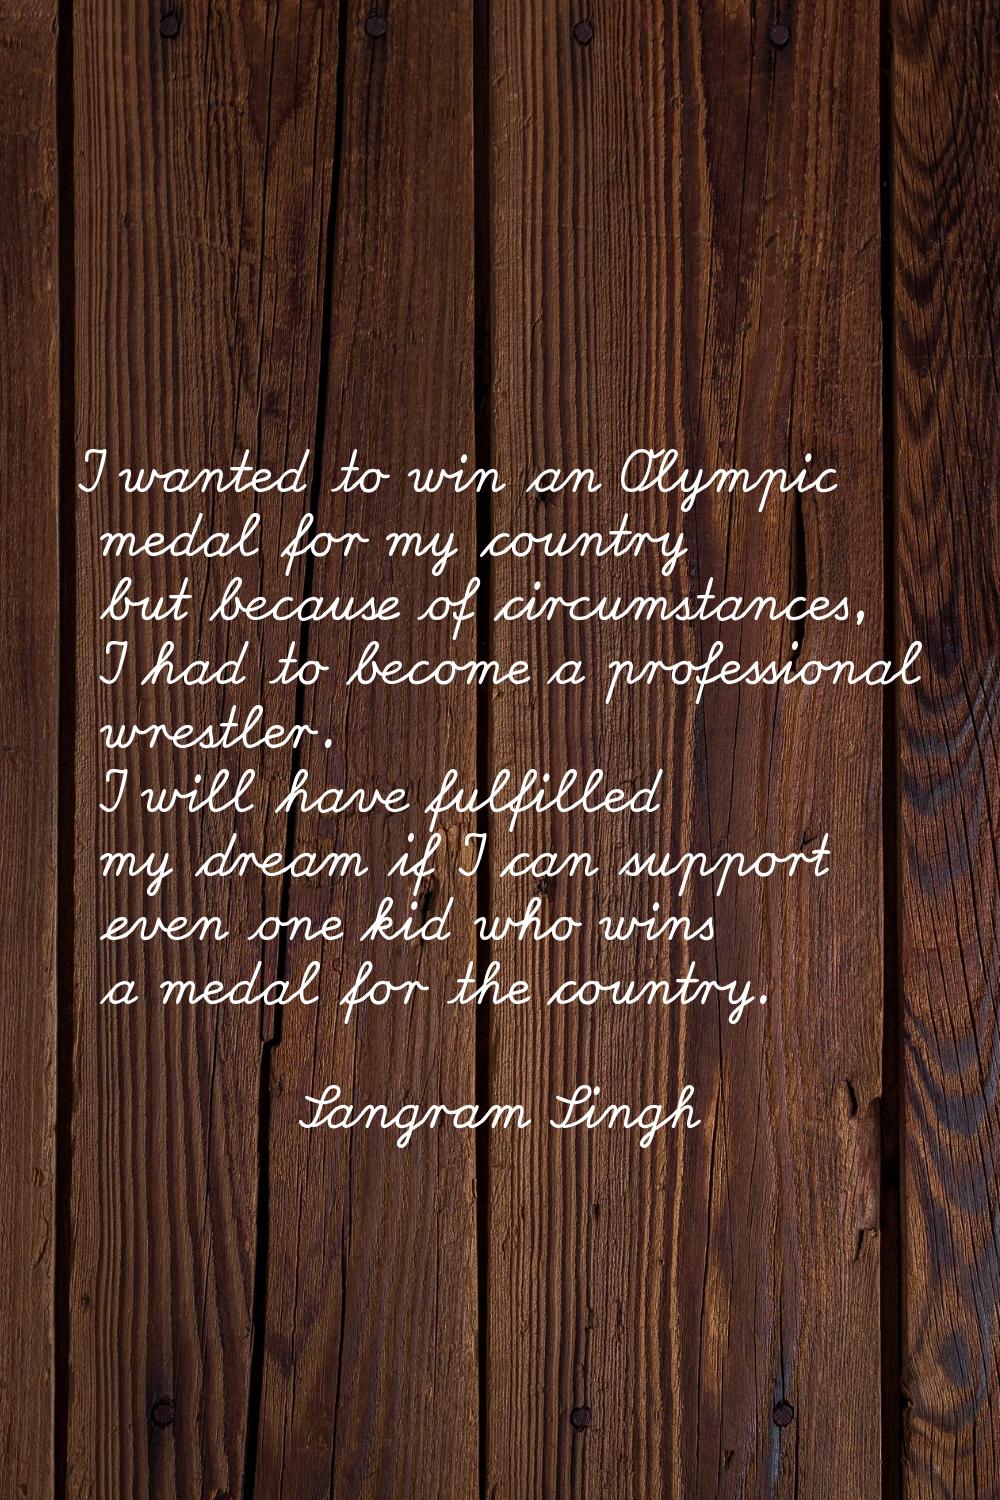 I wanted to win an Olympic medal for my country but because of circumstances, I had to become a pro